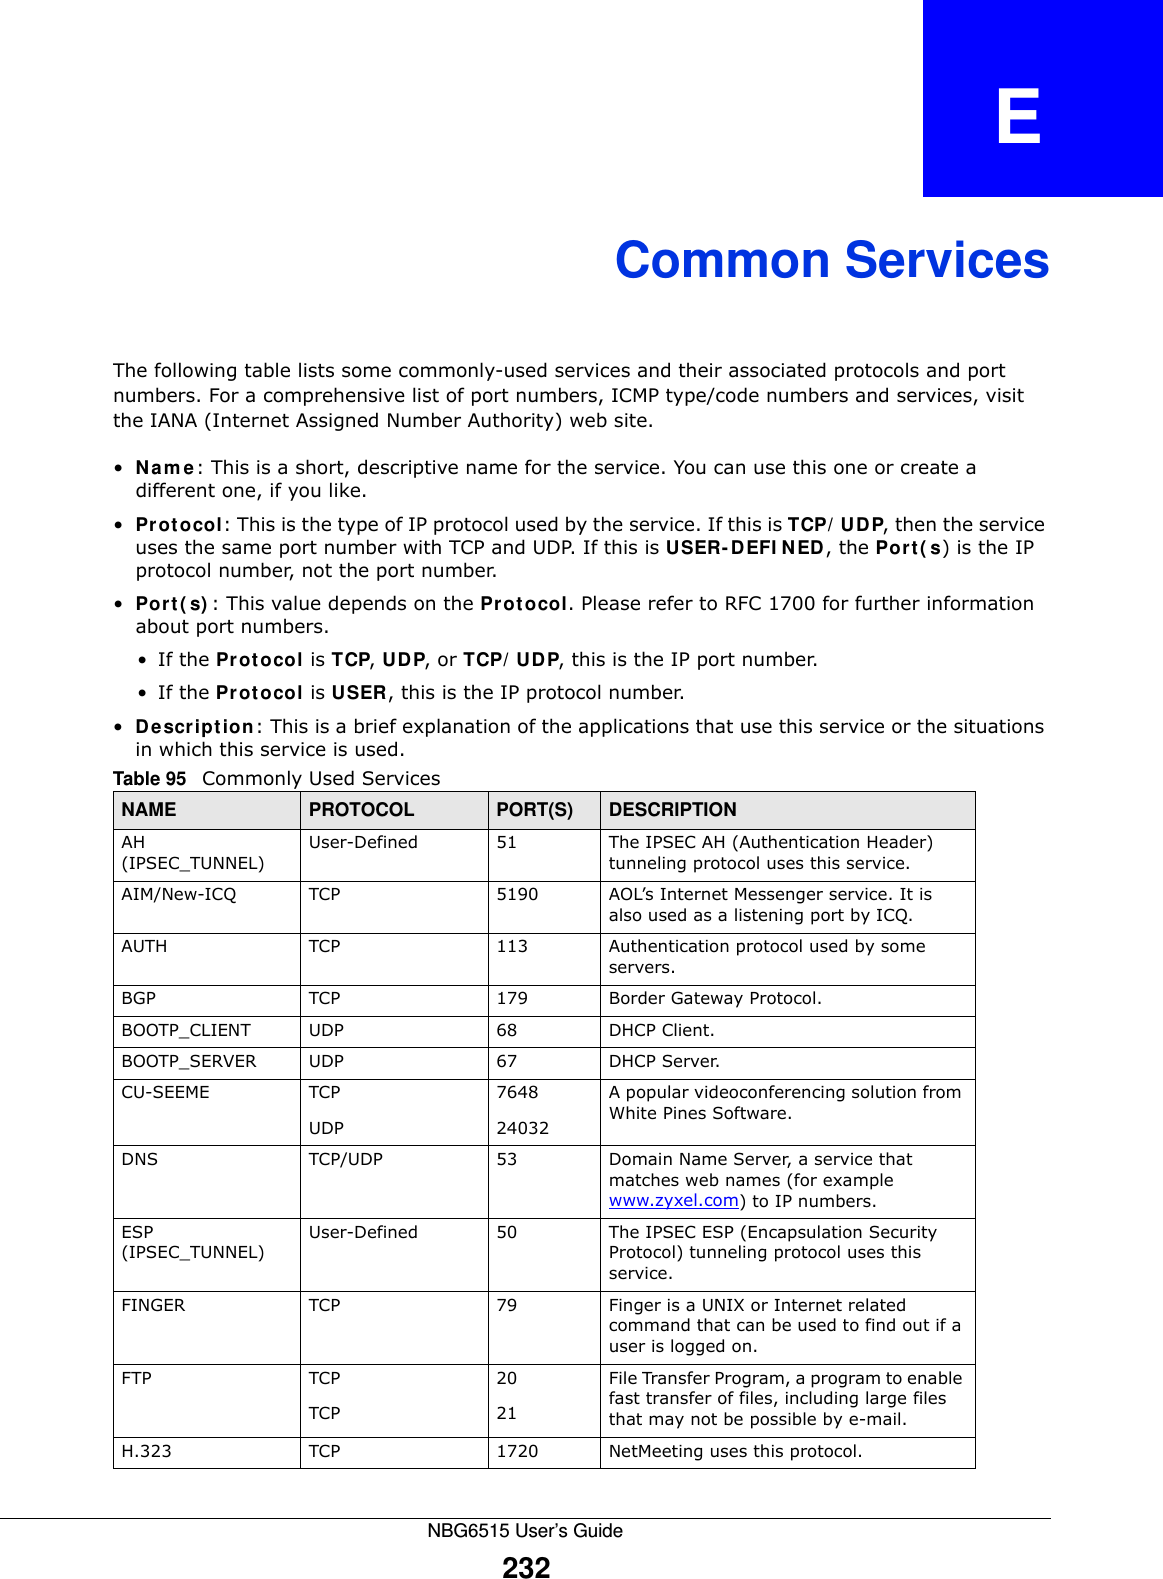 NBG6515 User’s Guide232APPENDIX   ECommon ServicesThe following table lists some commonly-used services and their associated protocols and port numbers. For a comprehensive list of port numbers, ICMP type/code numbers and services, visit the IANA (Internet Assigned Number Authority) web site. •N a m e : This is a short, descriptive name for the service. You can use this one or create a different one, if you like.•Pr ot ocol: This is the type of IP protocol used by the service. If this is TCP/ UDP, then the service uses the same port number with TCP and UDP. If this is USER- D EFI N ED , the Po rt ( s) is the IP protocol number, not the port number.•Por t ( s) : This value depends on the Pr ot o col. Please refer to RFC 1700 for further information about port numbers.•If the Pr ot oco l is TCP, UD P, or TCP/ UD P, this is the IP port number.•If the Pr ot oco l is USER, this is the IP protocol number.•D e scr ip t ion : This is a brief explanation of the applications that use this service or the situations in which this service is used.Table 95   Commonly Used ServicesNAME PROTOCOL PORT(S) DESCRIPTIONAH (IPSEC_TUNNEL)User-Defined 51 The IPSEC AH (Authentication Header) tunneling protocol uses this service.AIM/New-ICQ TCP 5190 AOL’s Internet Messenger service. It is also used as a listening port by ICQ.AUTH TCP 113 Authentication protocol used by some servers.BGP TCP 179 Border Gateway Protocol.BOOTP_CLIENT UDP 68 DHCP Client.BOOTP_SERVER UDP 67 DHCP Server.CU-SEEME TCPUDP764824032A popular videoconferencing solution from White Pines Software.DNS TCP/UDP 53 Domain Name Server, a service that matches web names (for example www.zyxel.com) to IP numbers.ESP (IPSEC_TUNNEL)User-Defined 50 The IPSEC ESP (Encapsulation Security Protocol) tunneling protocol uses this service.FINGER TCP 79 Finger is a UNIX or Internet related command that can be used to find out if a user is logged on.FTP TCPTCP2021File Transfer Program, a program to enable fast transfer of files, including large files that may not be possible by e-mail.H.323 TCP 1720 NetMeeting uses this protocol.